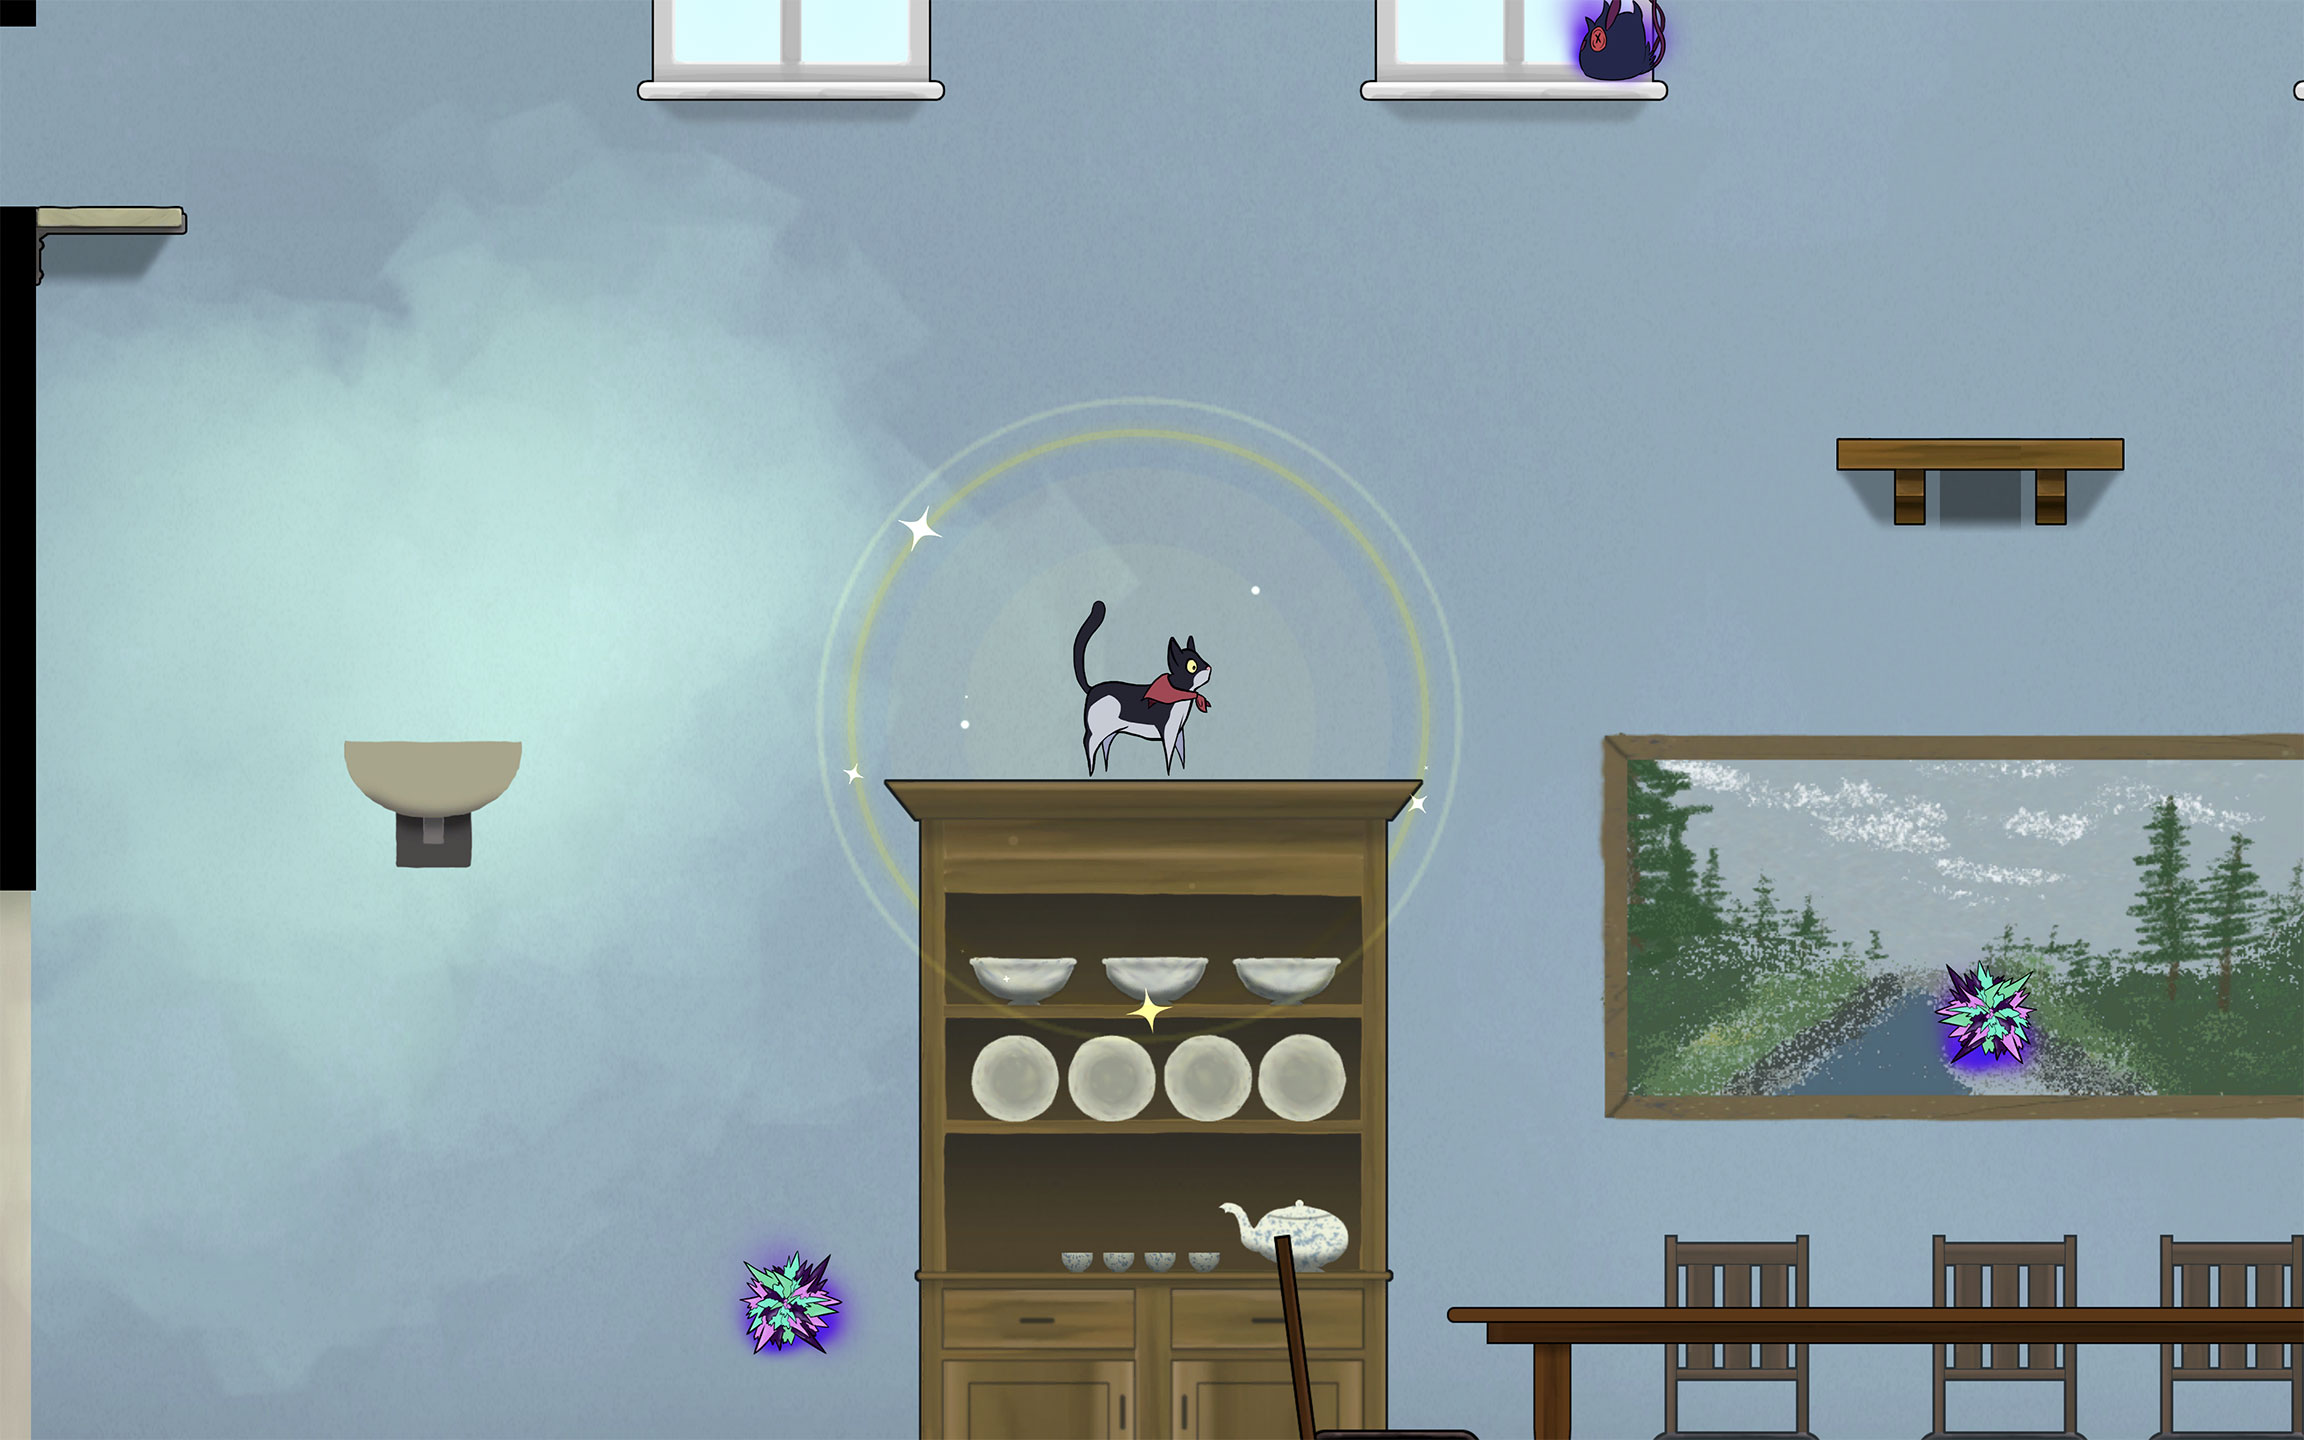 Screenshot of the game Paws of Purity showing Kitty standing on top of a china hutch.